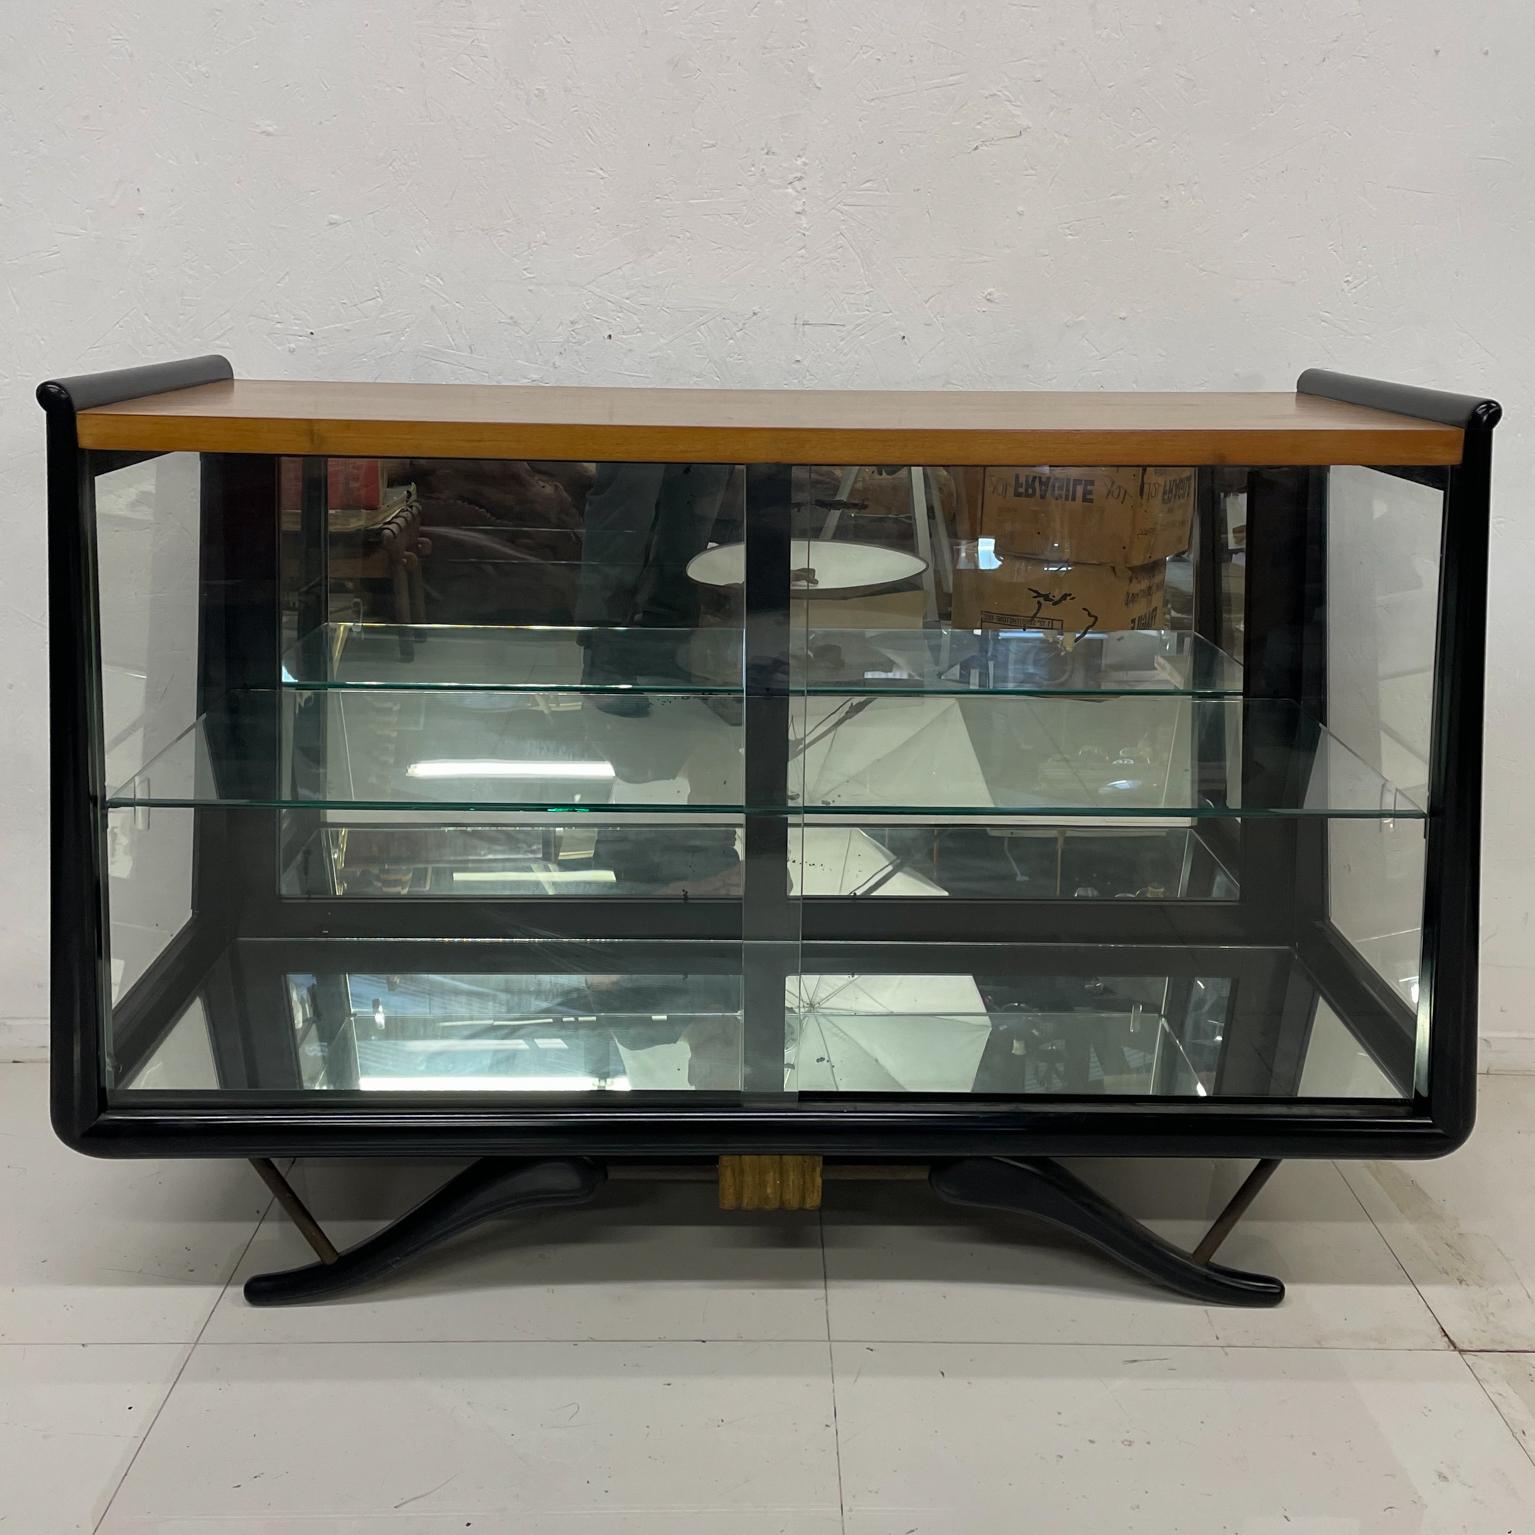 
Magnificent Modernism style of Eugenio Escudero
Mahogany Gilt Glass Vitrine Cabinet Display Showcase.
Unmarked.
Solid mahogany black lacquer finish.
Side glass and front glass sliding doors. Interior has mirrored wall.
Detailed curved sculptural